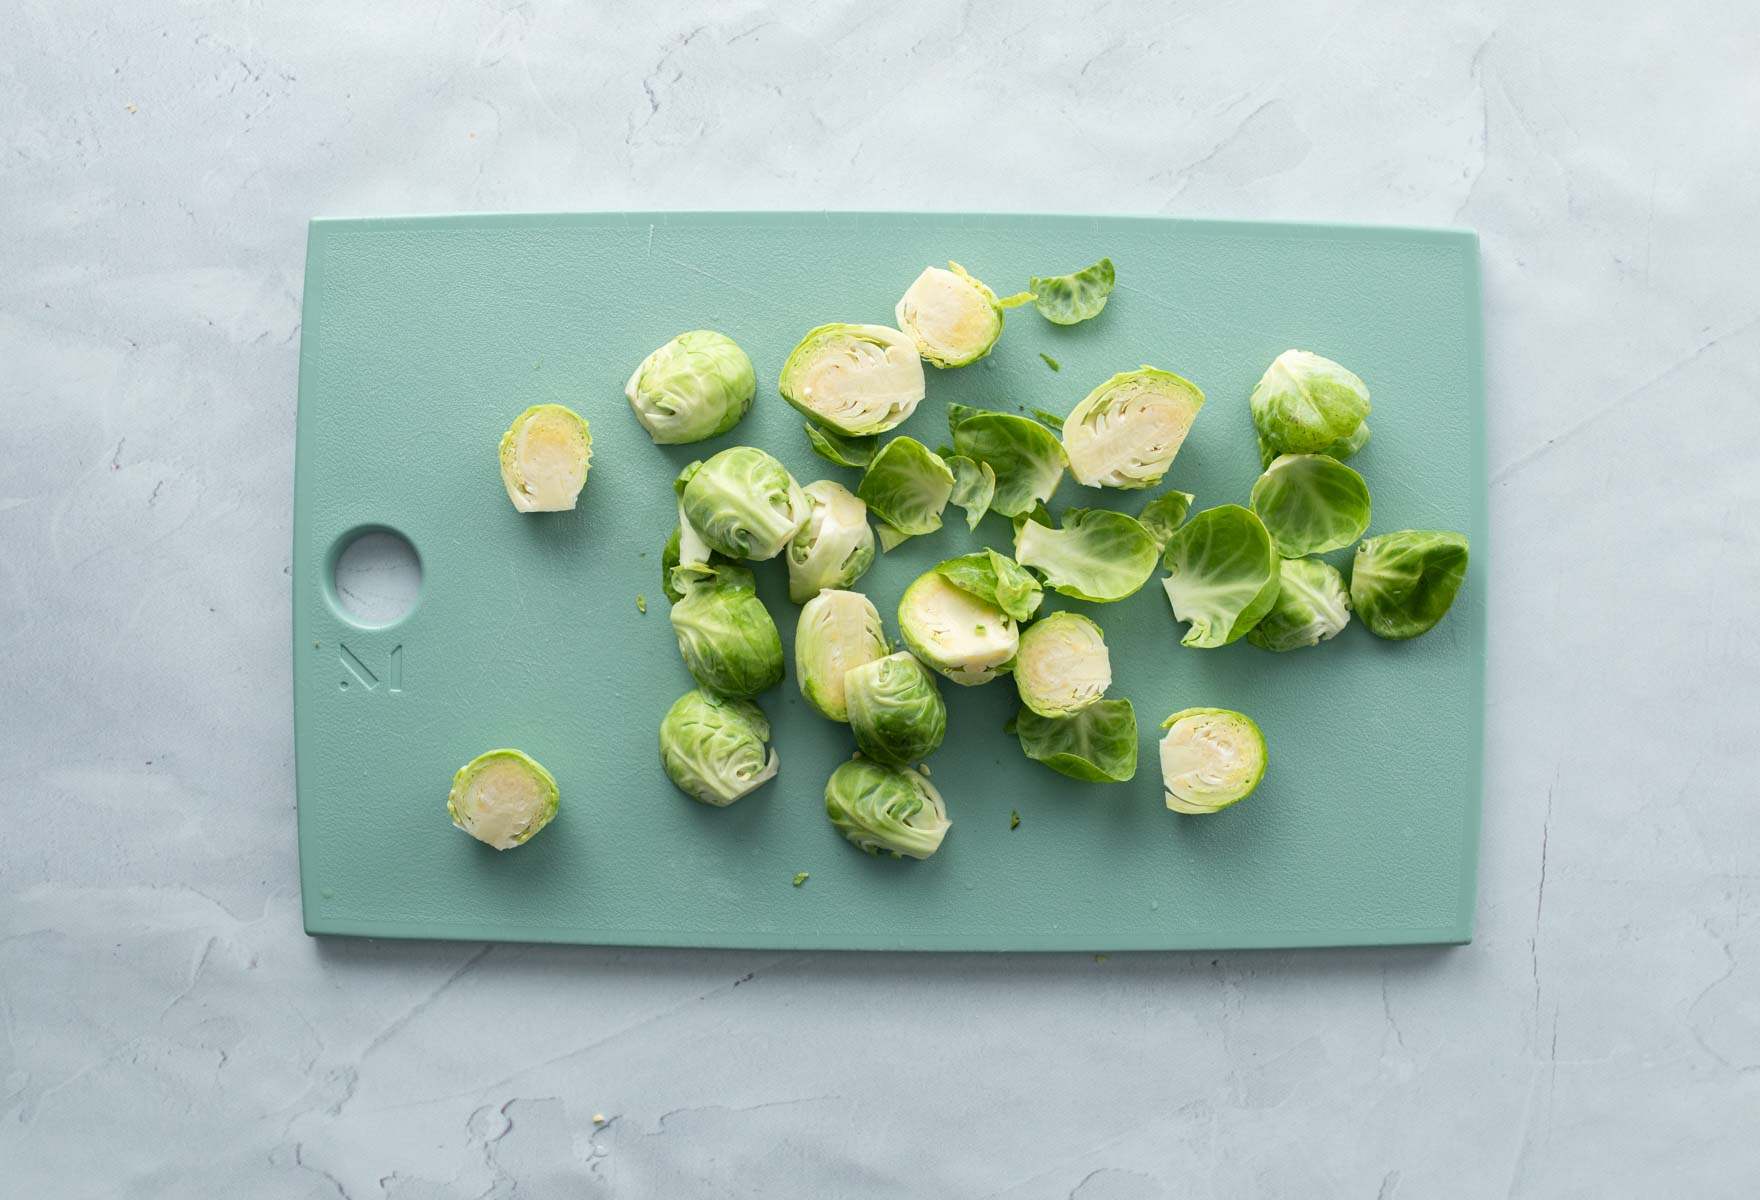 halved brussels sprouts on cutting board